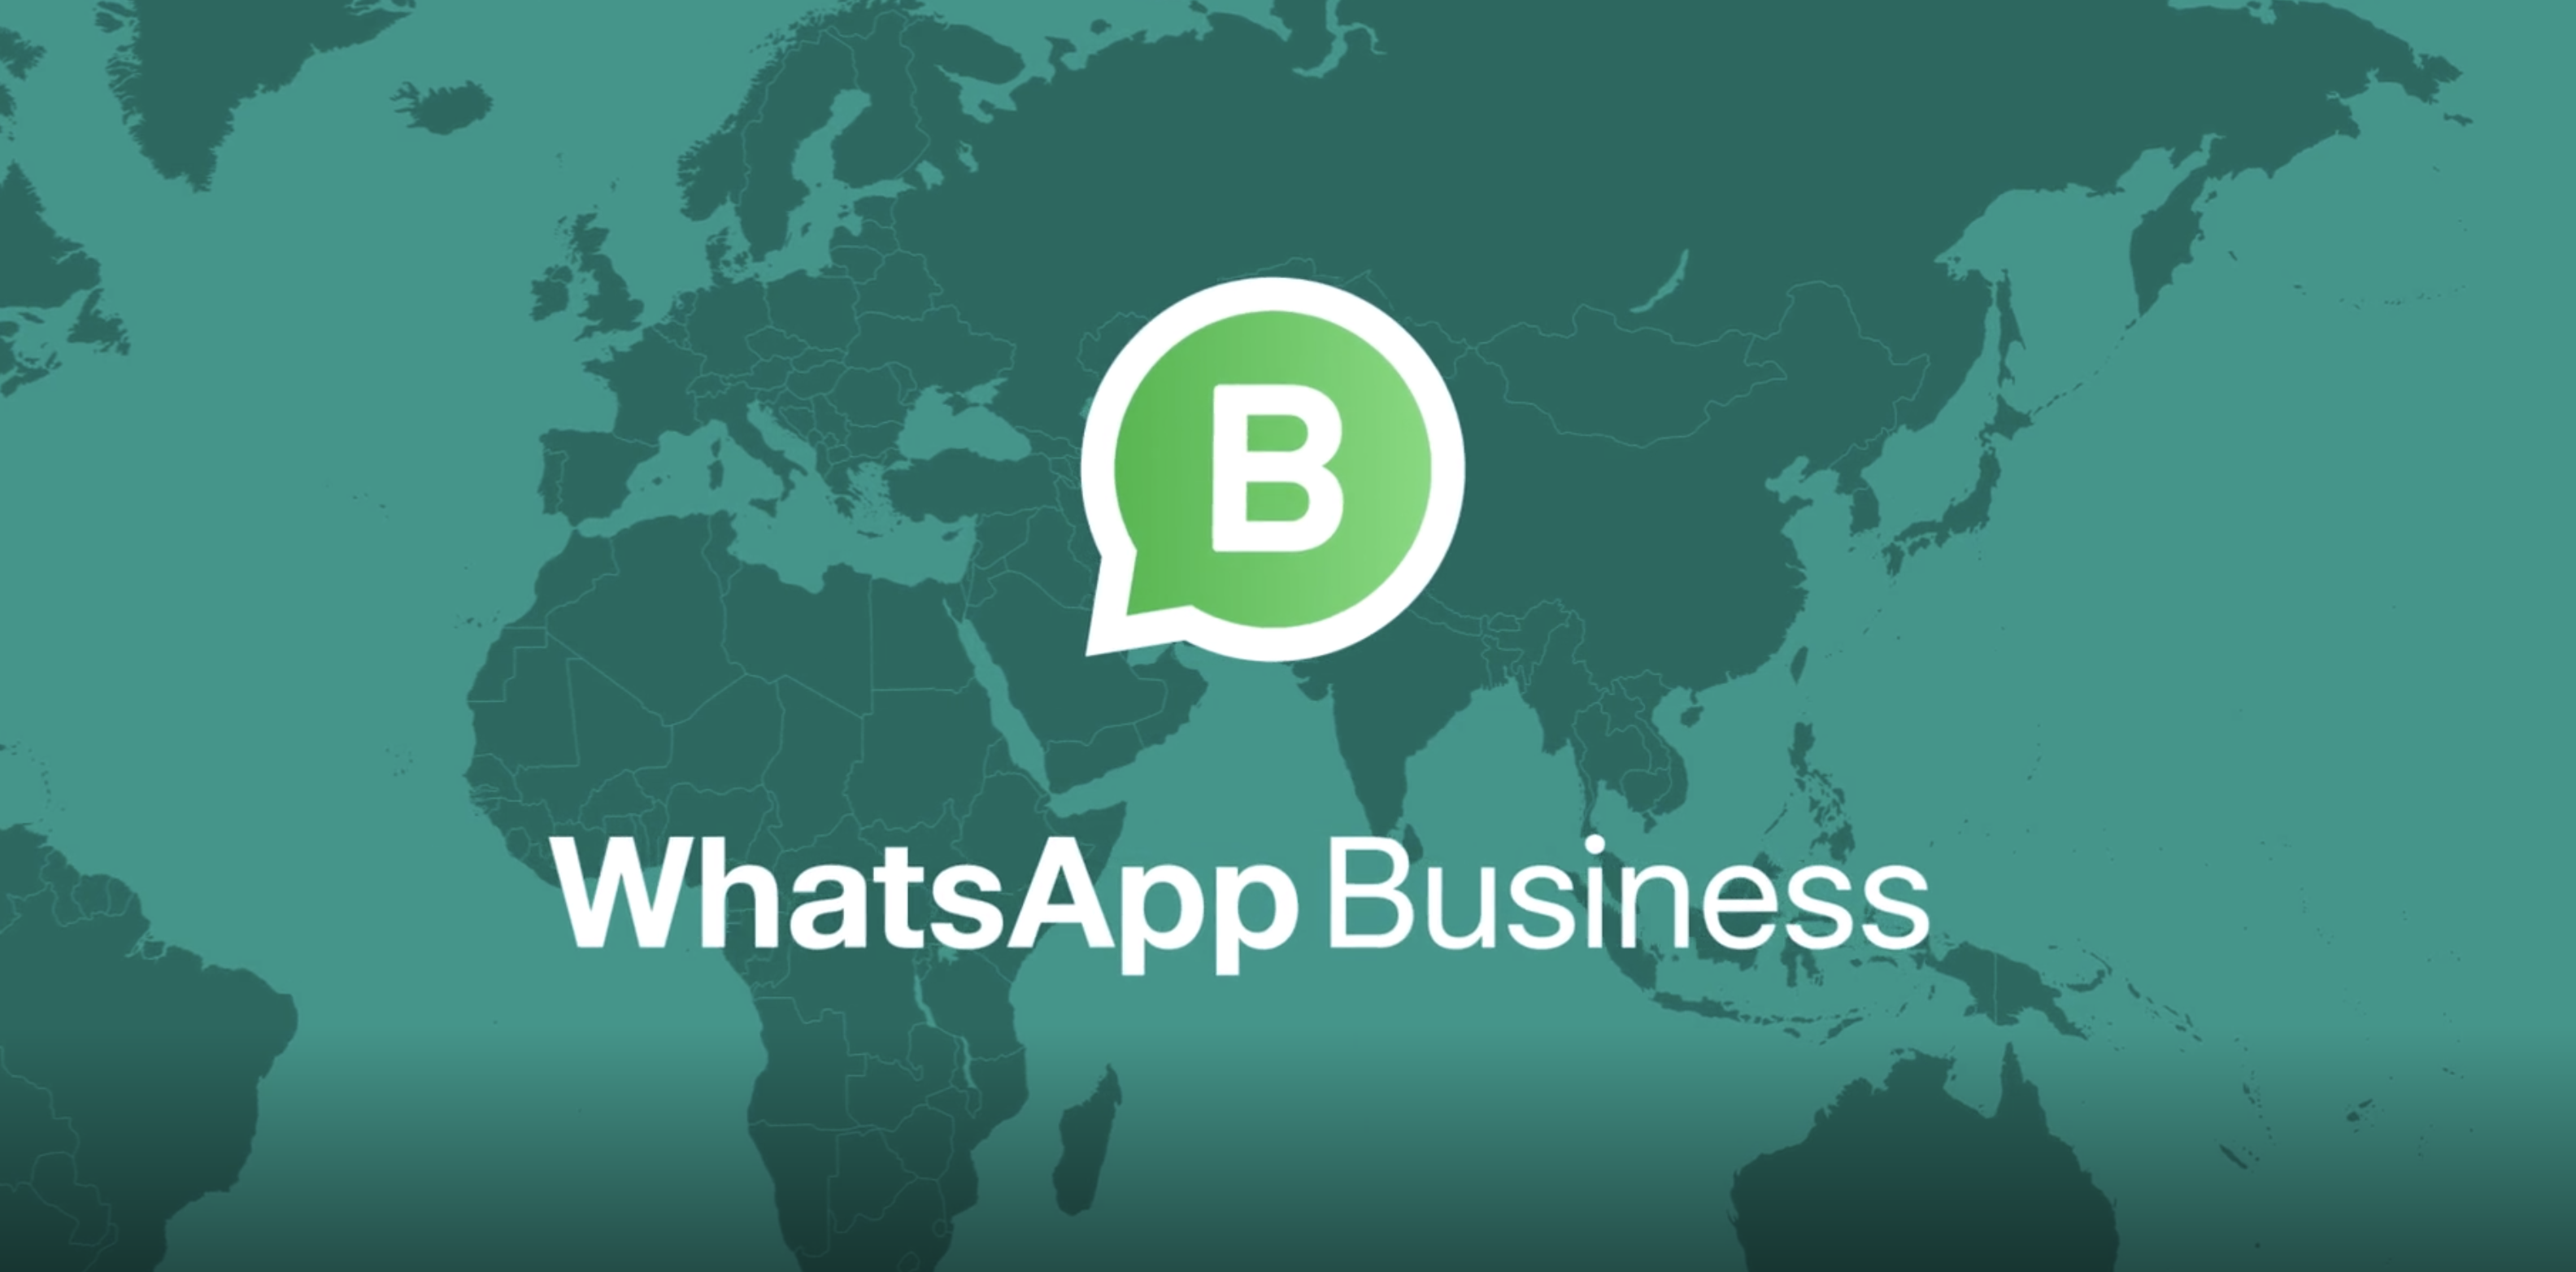 Instant Messaging apps for work: WhatsApp Business